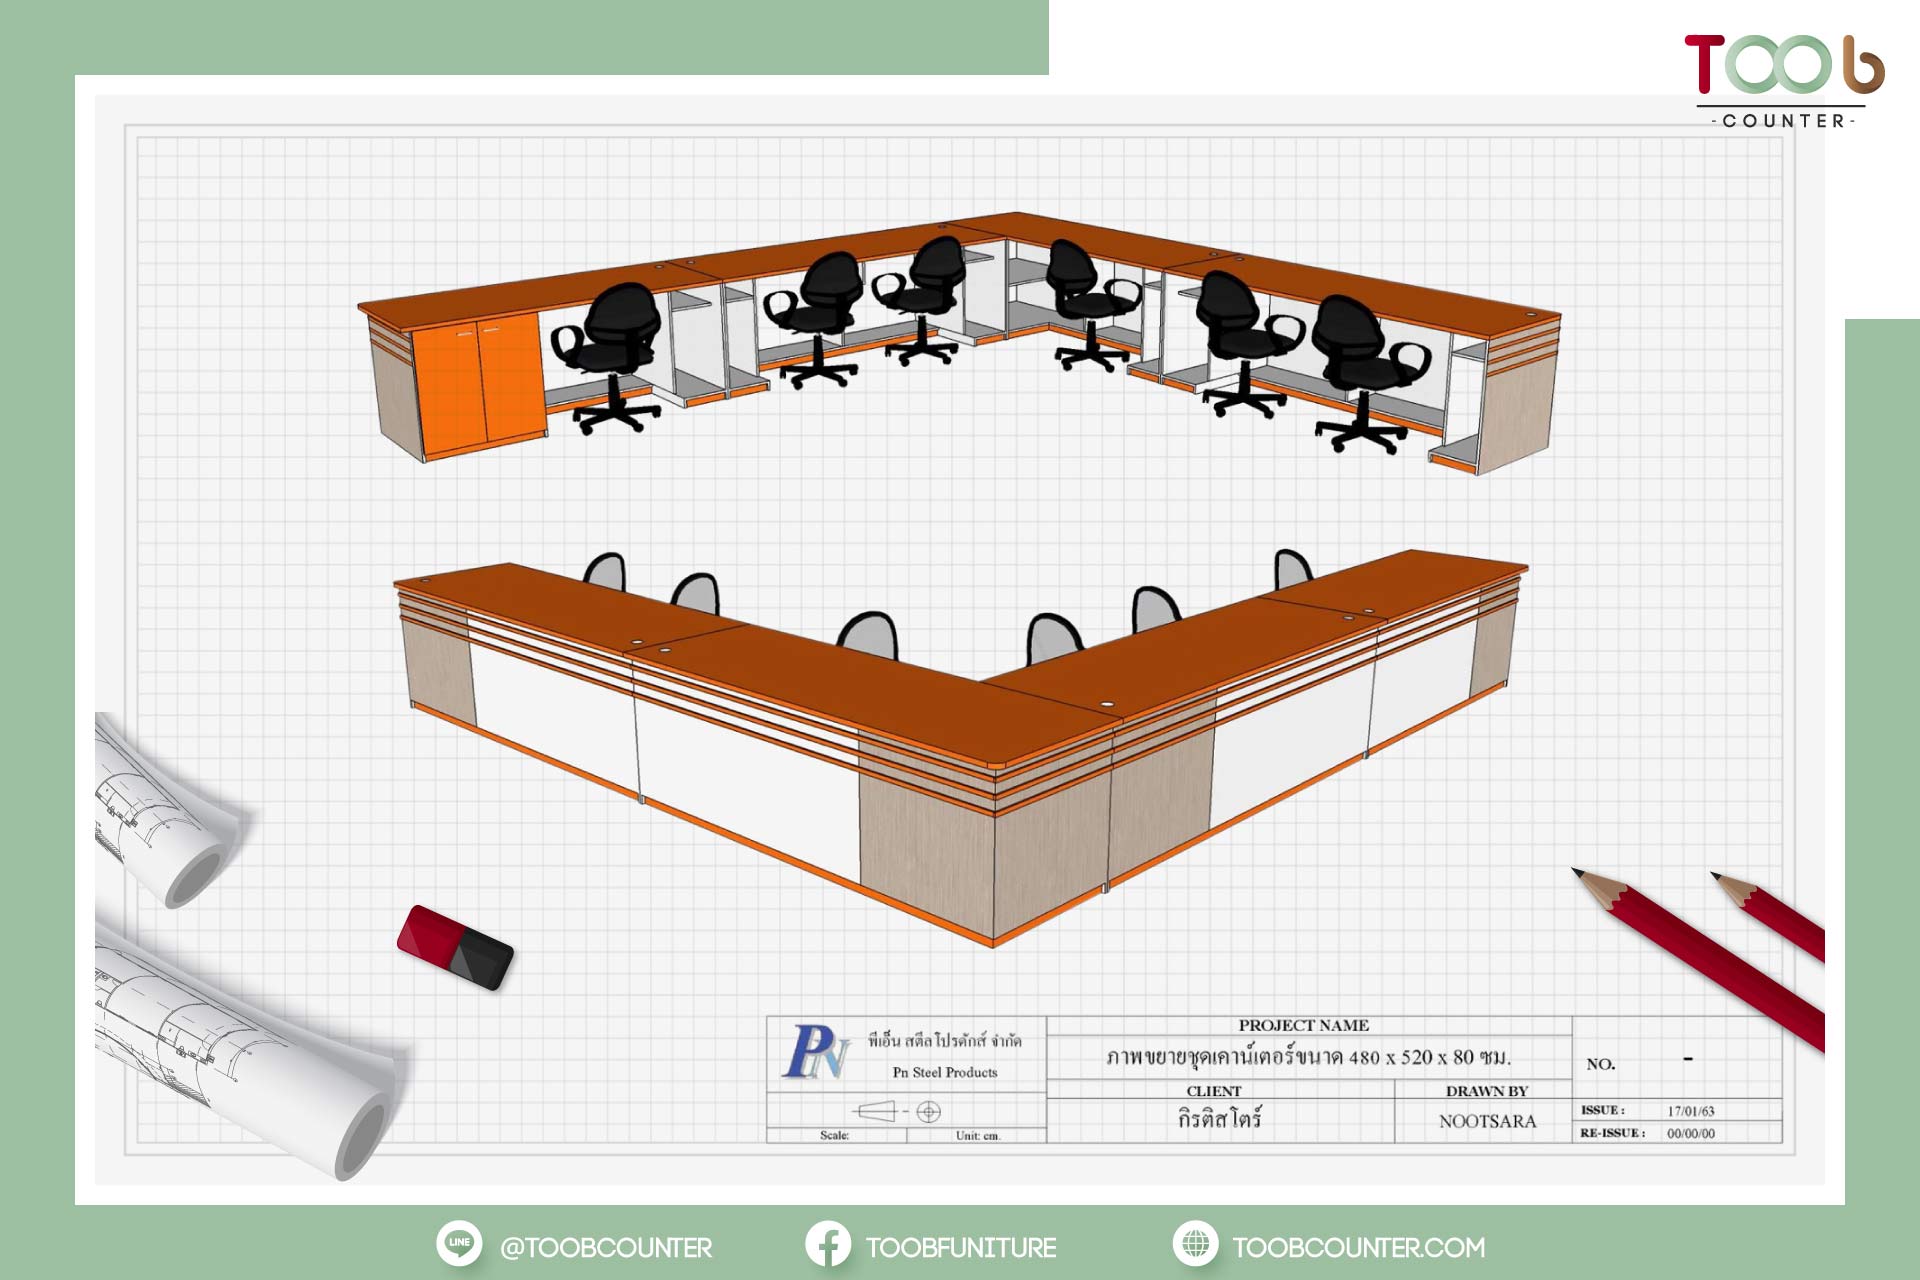 Drawing perspective view design large information counter